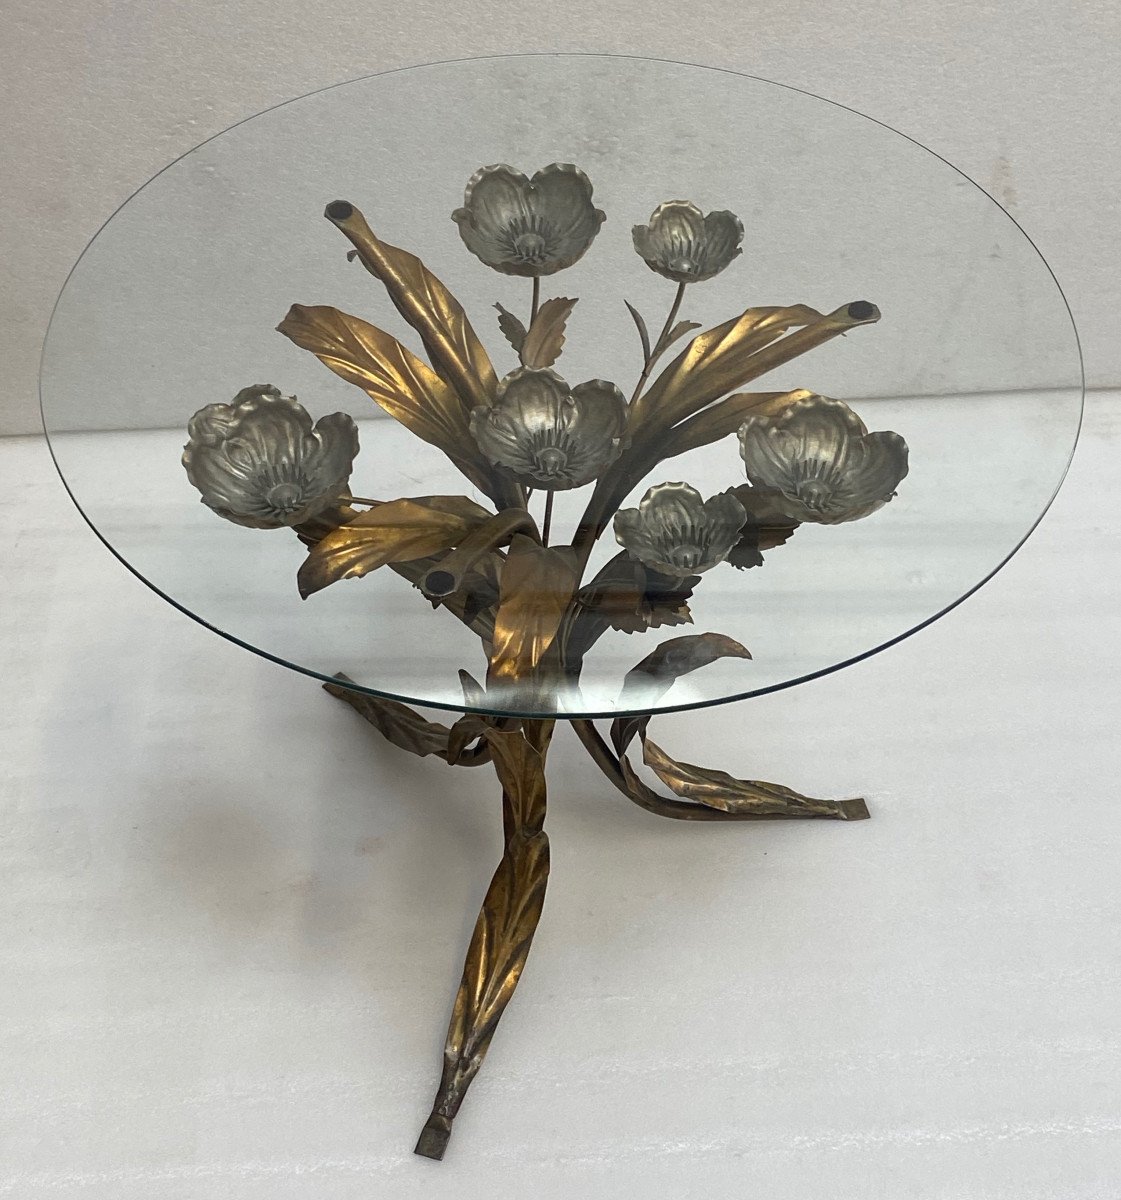 1970′ Tripod Pedestal Table With Anemones In Golden And Silver Iron By Hans Kogl